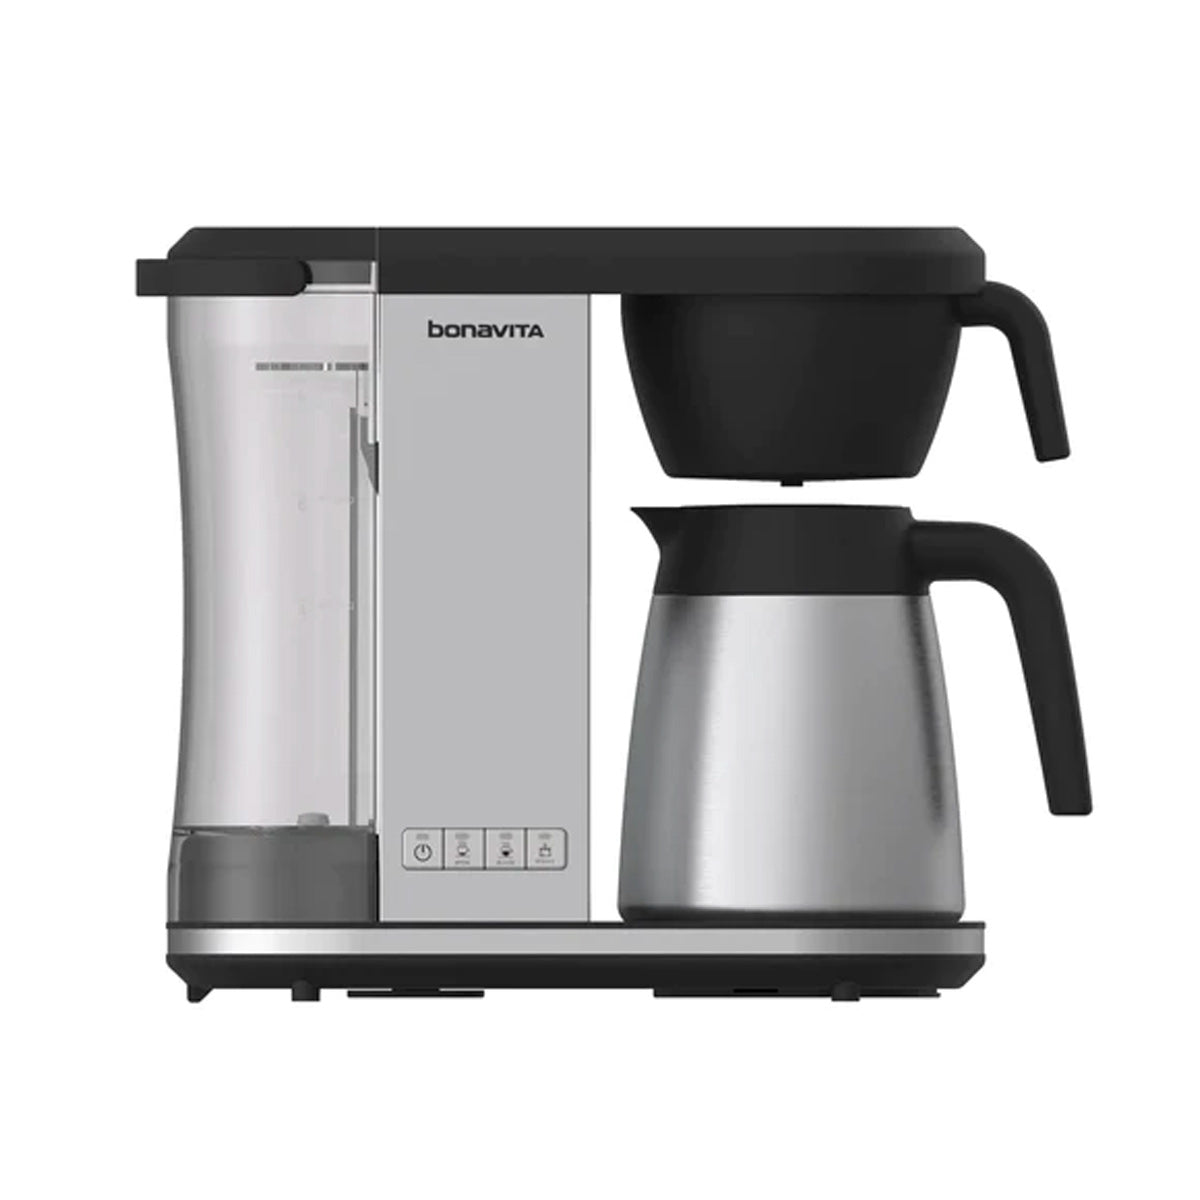 Bonavita 5-Cup Stainless Steel Carafe Coffee Maker (BV1500TS) for